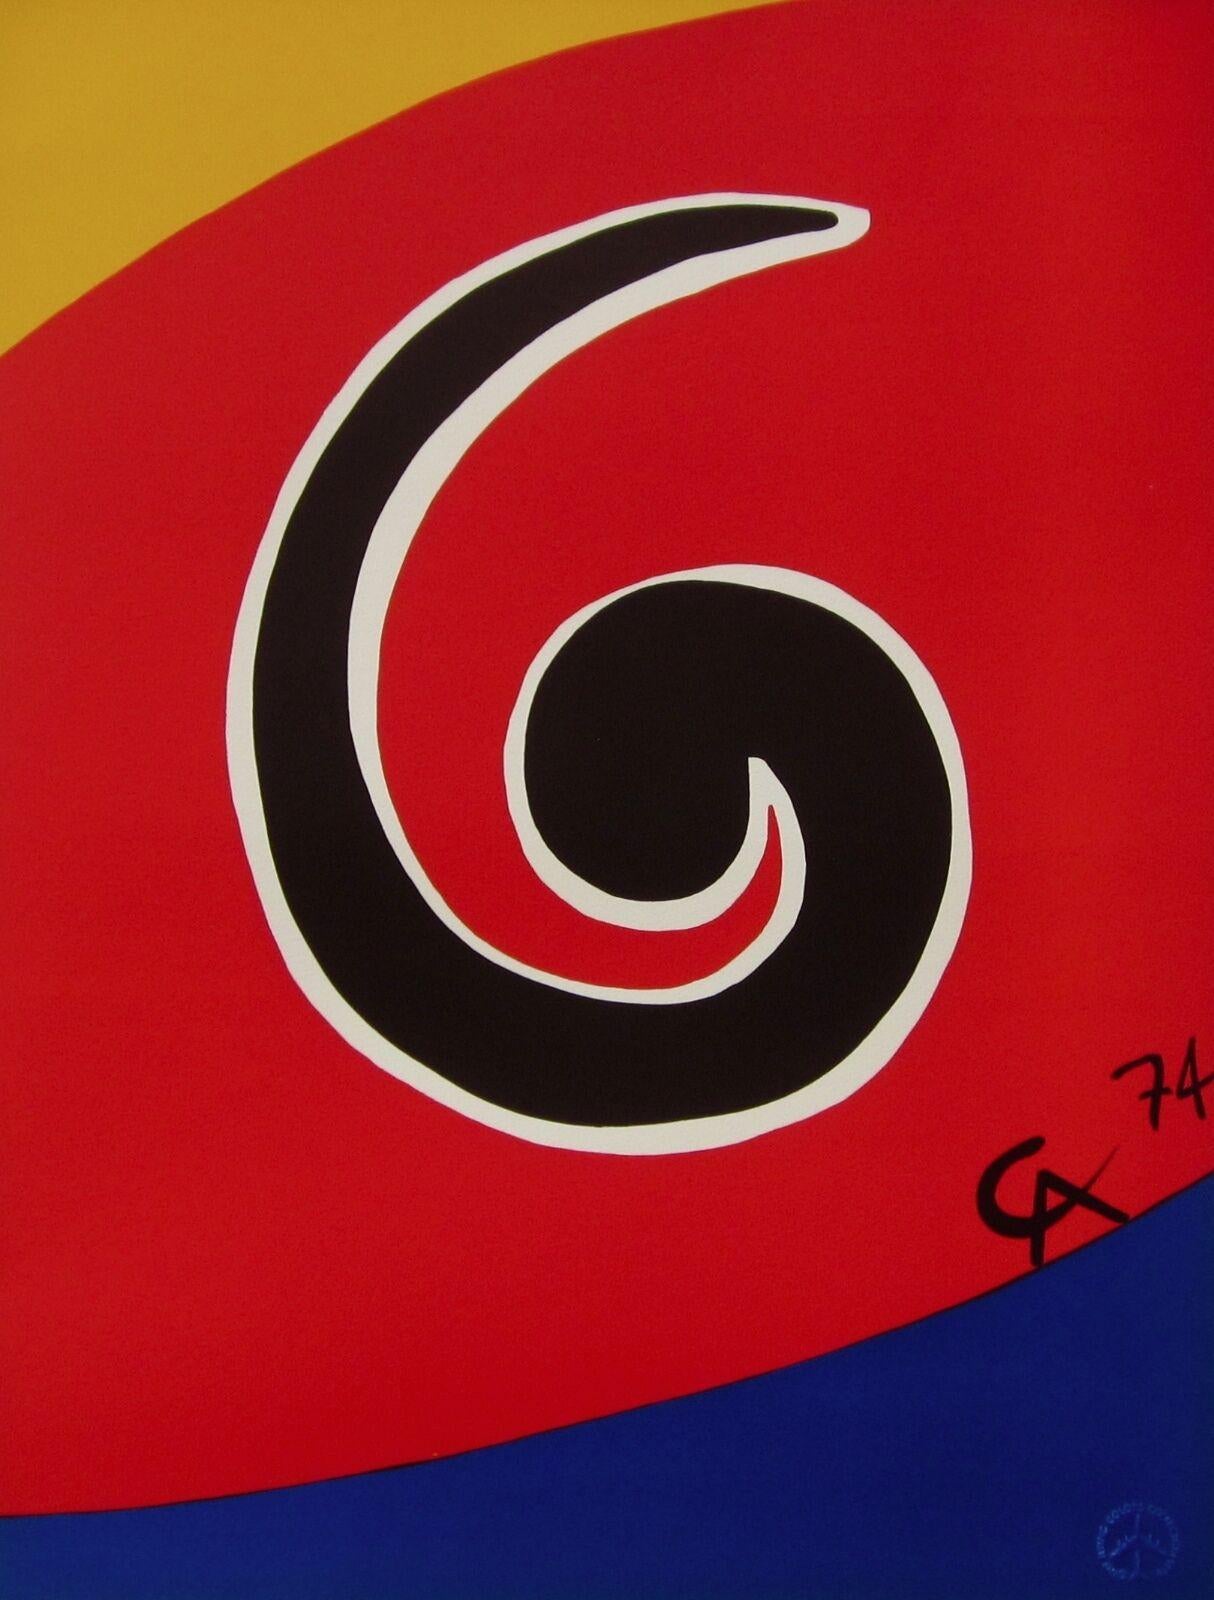 Artist: Alexander Calder (1898-1976)
Title(s): Sky Swirl; Sky Bird; Beastie (from the Braniff International Airways Flying Colors Collection)
Year: 1974
Medium: Lithographs on Arches paper 
Size: 20 x 26 inches, each (three artworks)
Condition: